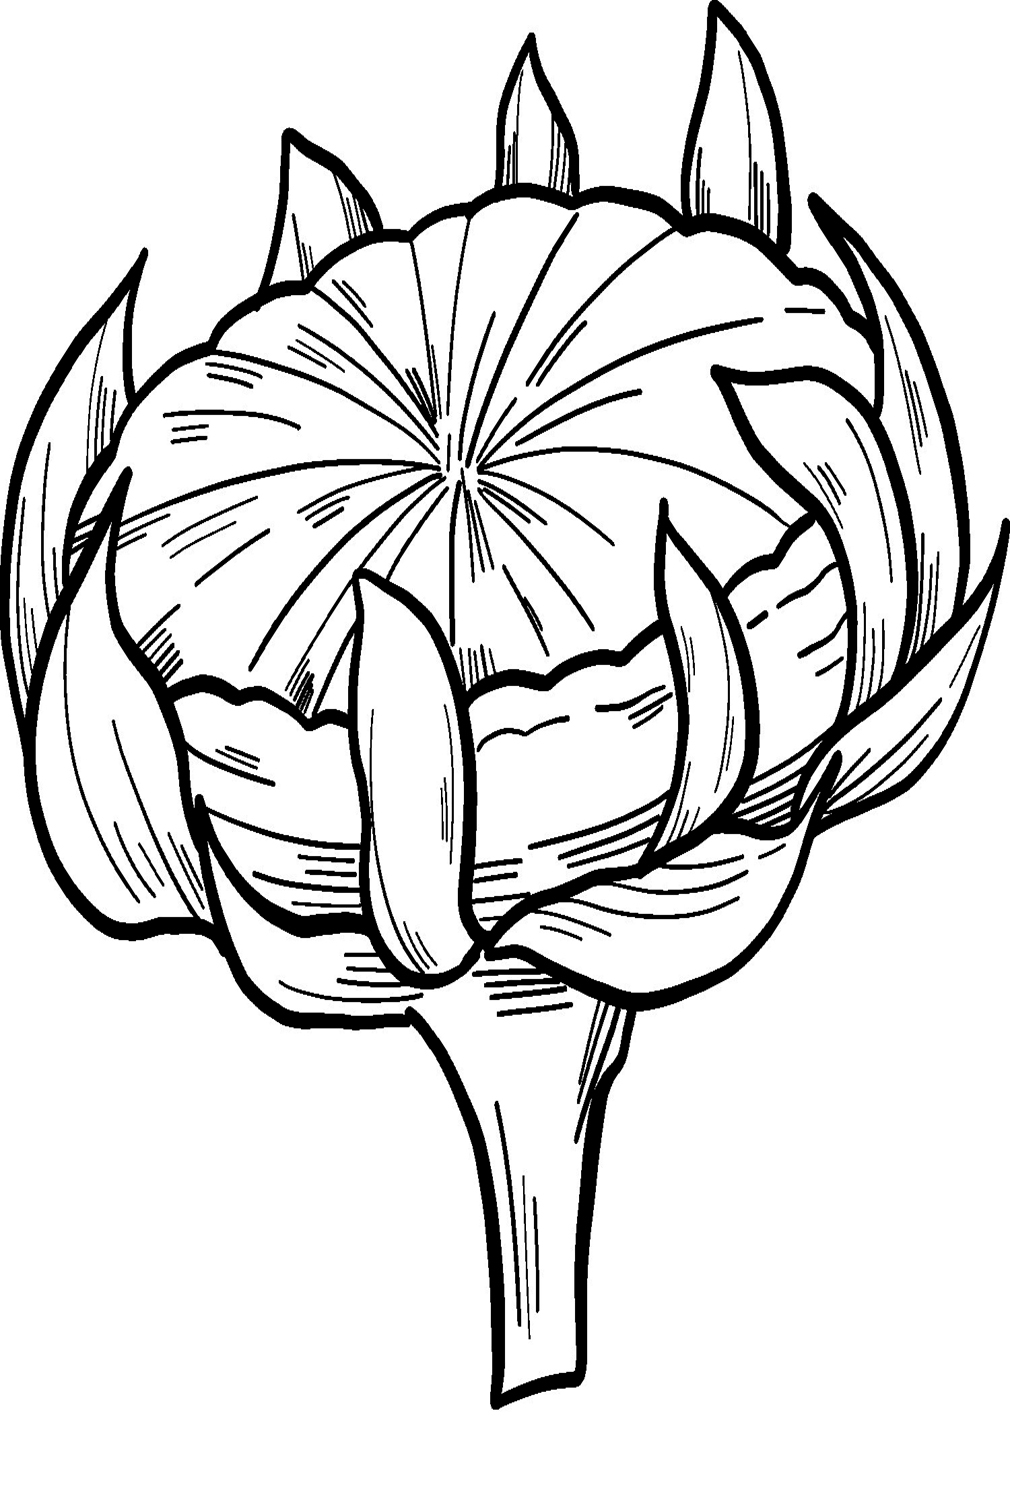 Sunflower Bud Coloring Pages